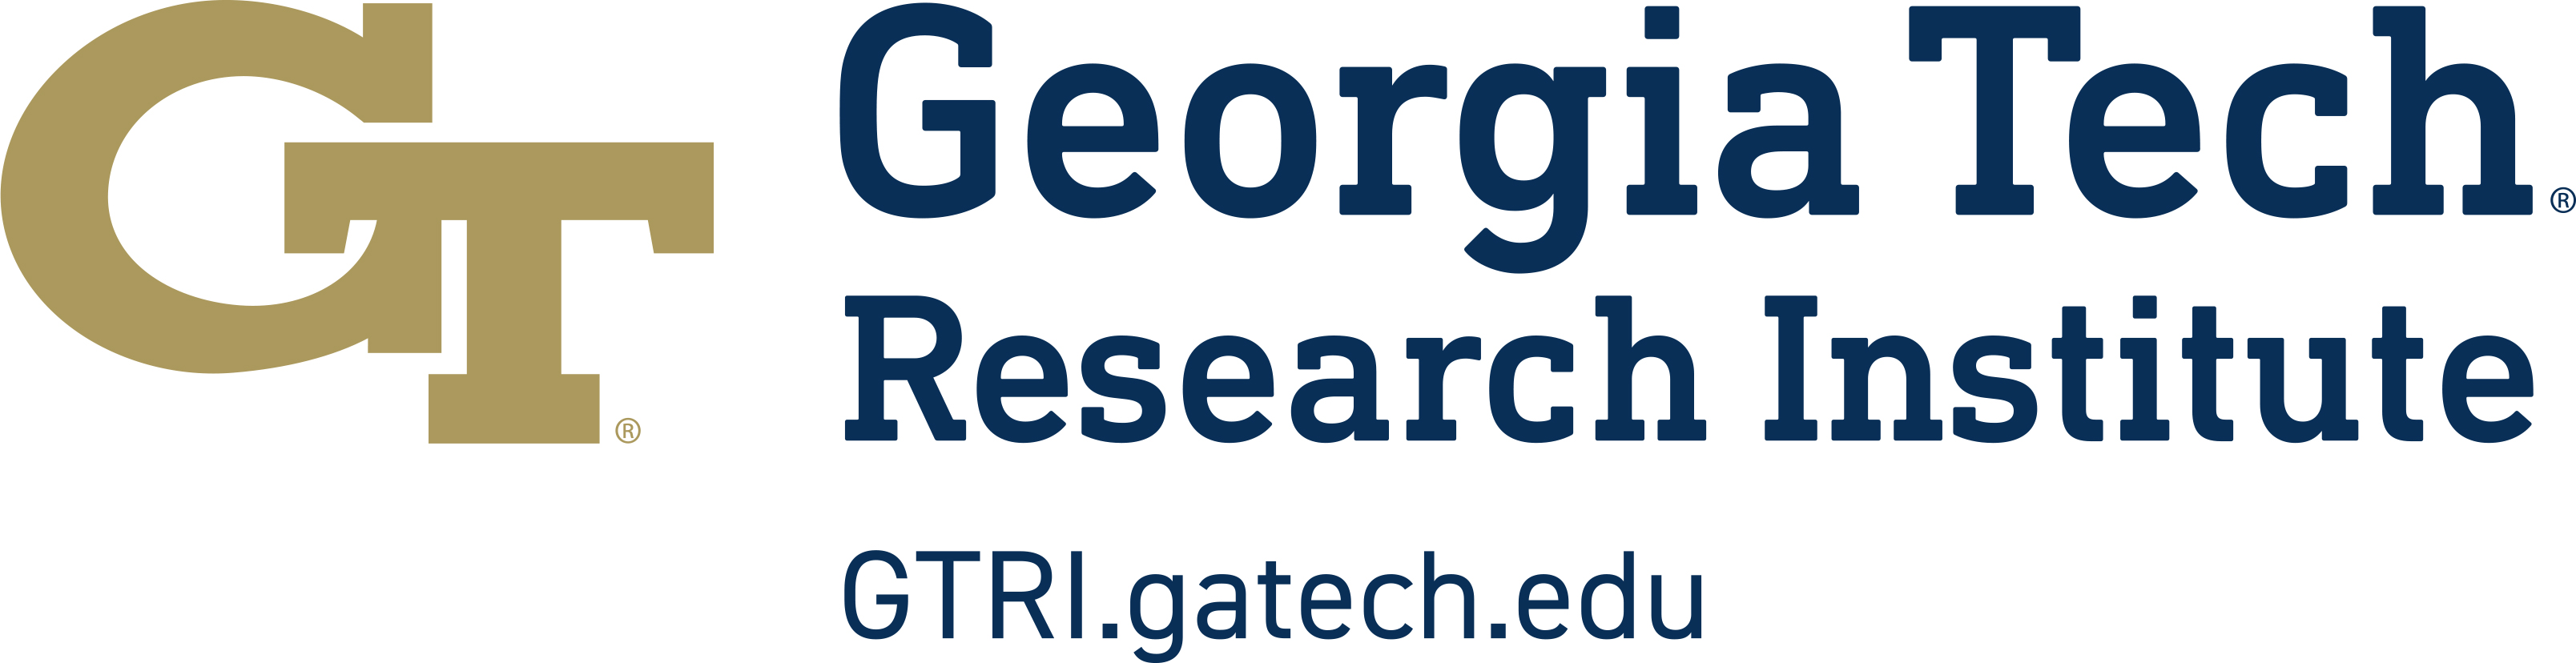 Georgia Tech Research Institute Sensors and Electromagnetic Applications Laboratory Logo